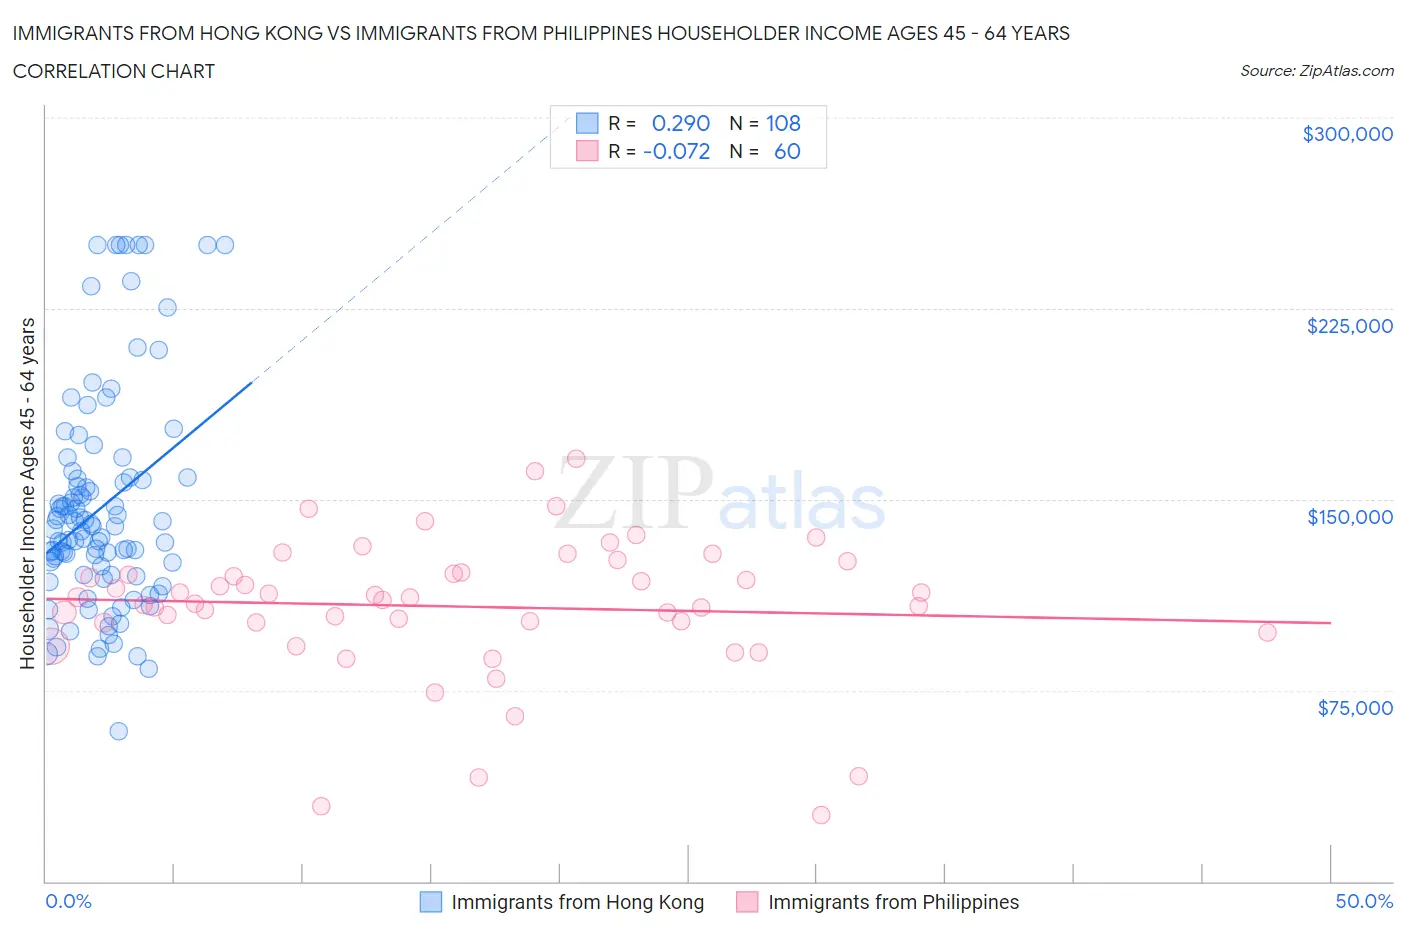 Immigrants from Hong Kong vs Immigrants from Philippines Householder Income Ages 45 - 64 years